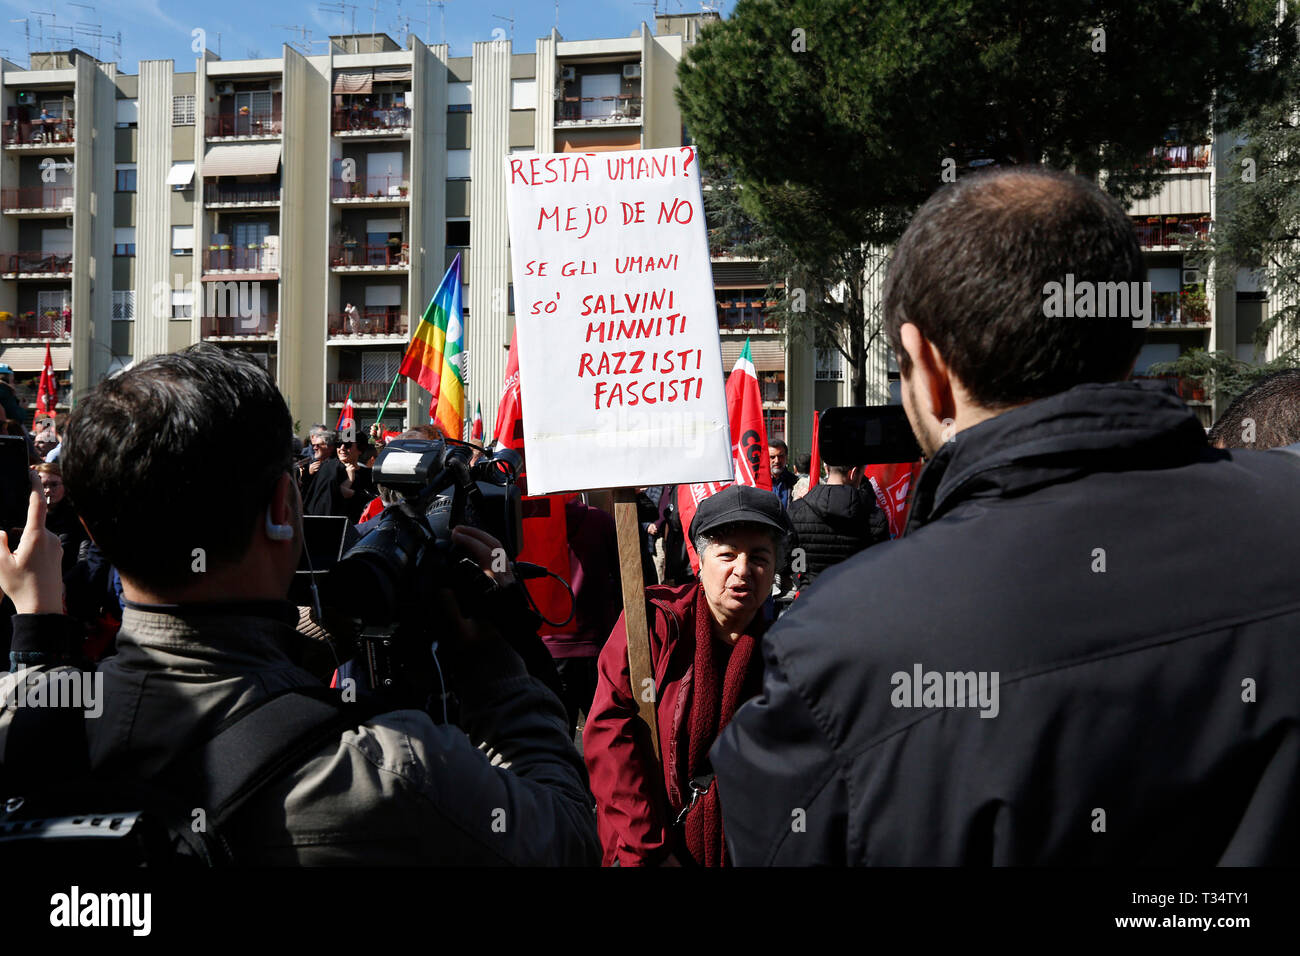 Rome, Italy. 06th Apr, 2019. Rome April 6th 2019. Counterdemonstration of activists from the anti-fascist movements in the Torre Maura district of Rome, two days after Rome residents and neo-fascists burned bins and shouted racist slogans at Roma families being temporarily hosted in their neighbourhood.  photo di Samantha Zucchi/Insidefoto Credit: insidefoto srl/Alamy Live News Stock Photo